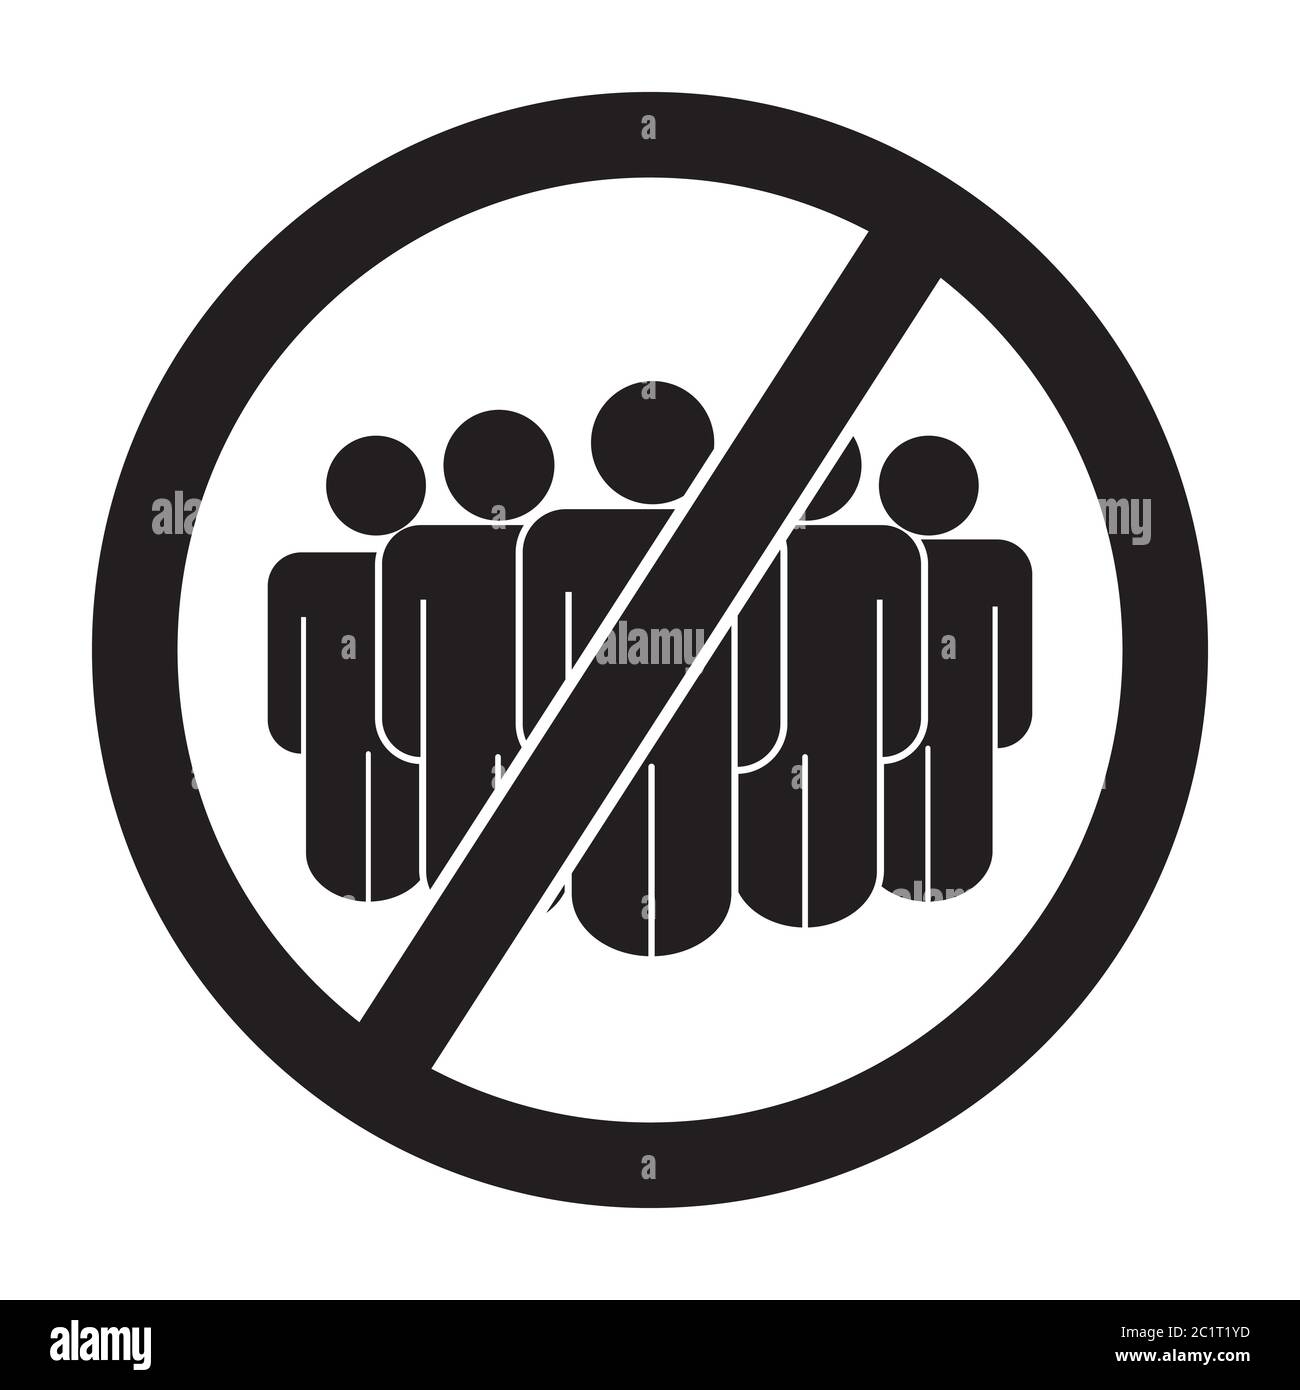 No Mass Gathering Sign. Social Distancing From People Crowd Rule During COVID-19 Pandemic. Black Illustration Isolated on a White Background. EPS Vect Stock Vector